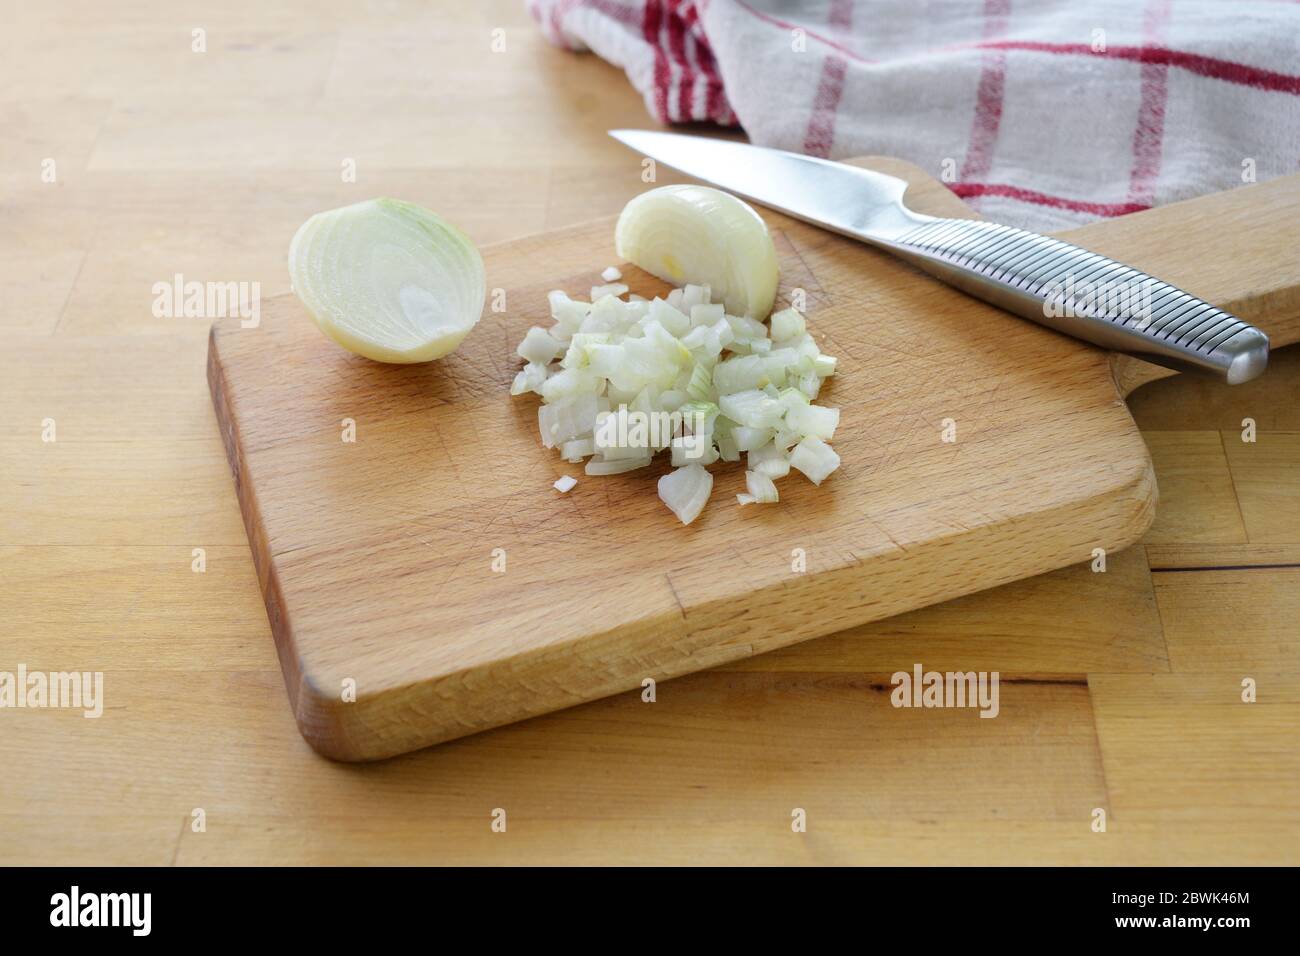 Cutting onions into small cubes with a kitchen knife on a wooden chopping board, selected focus, narrow depth of field Stock Photo